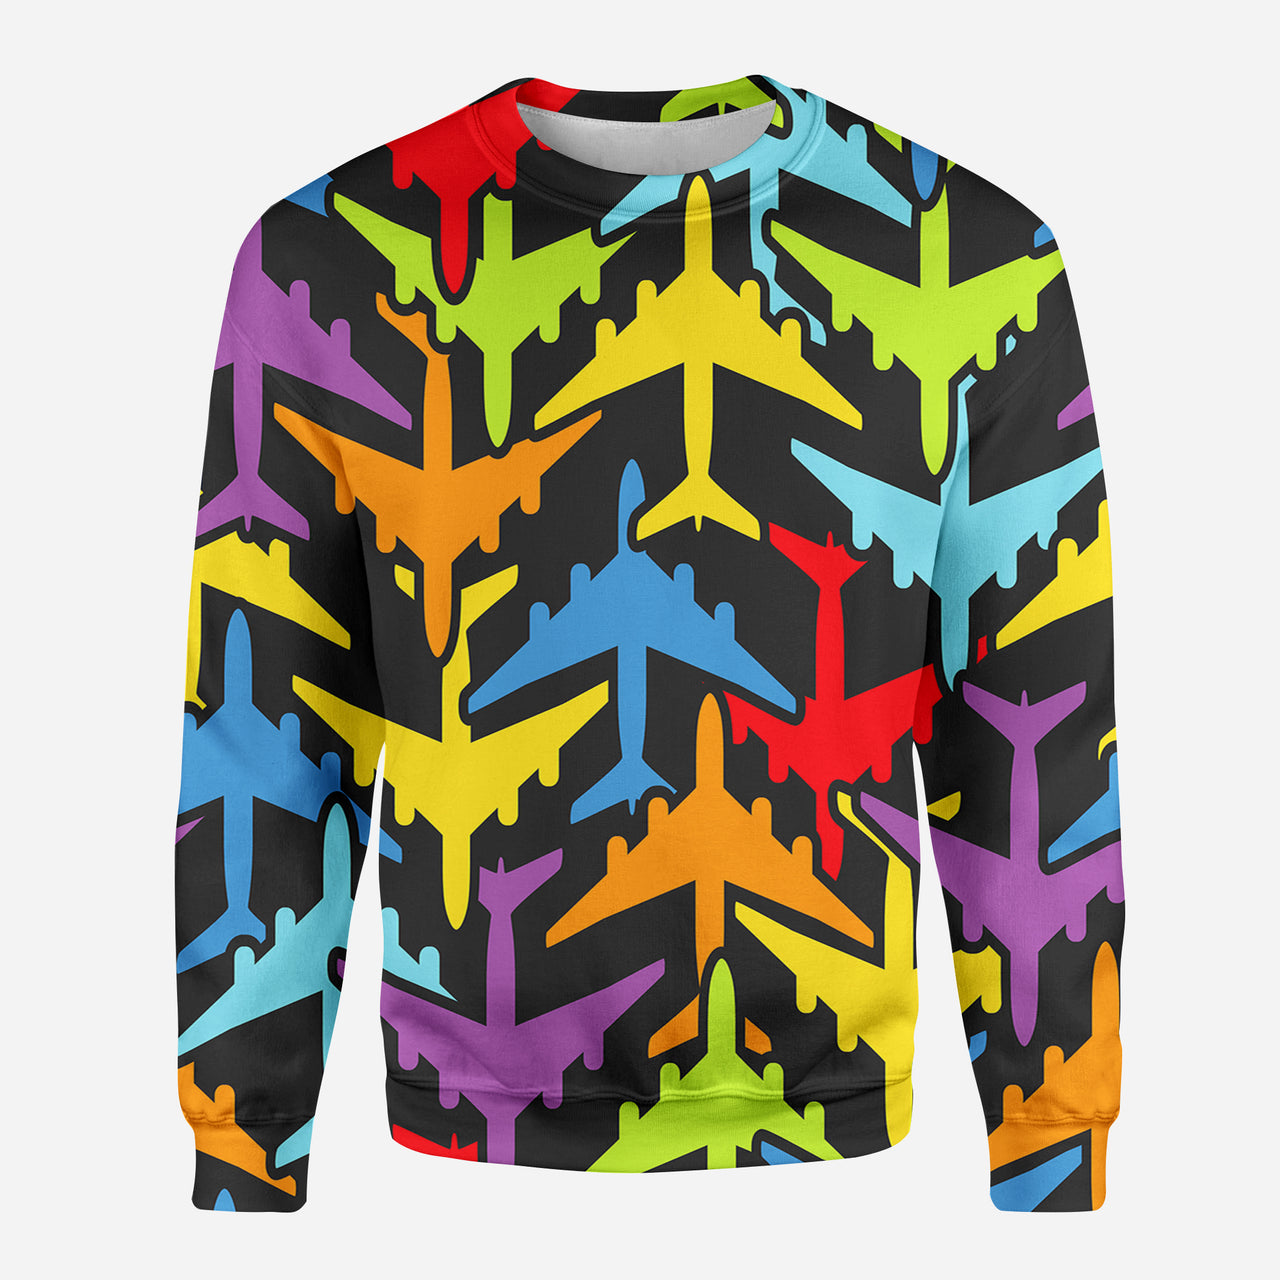 Super Colourful Airplanes Designed 3D Sweatshirts